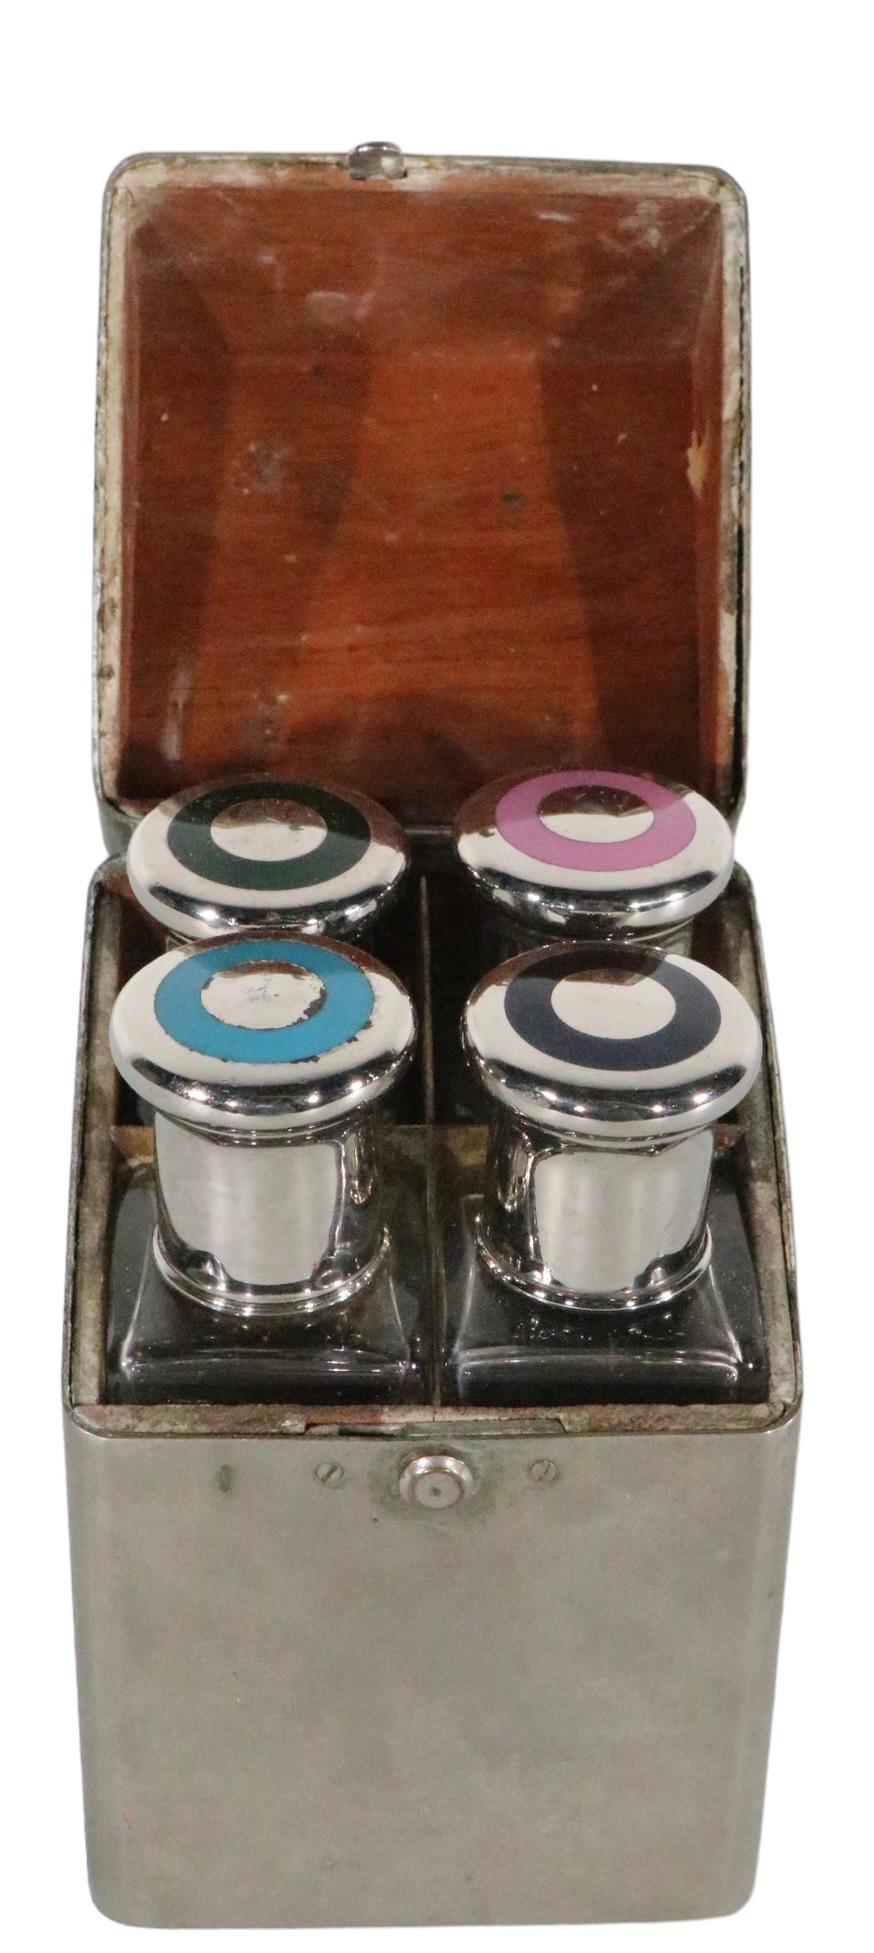 Art Deco Travel Toilet Water Perfume Bottle Caddy with Original Bottles c 1930s In Good Condition For Sale In New York, NY